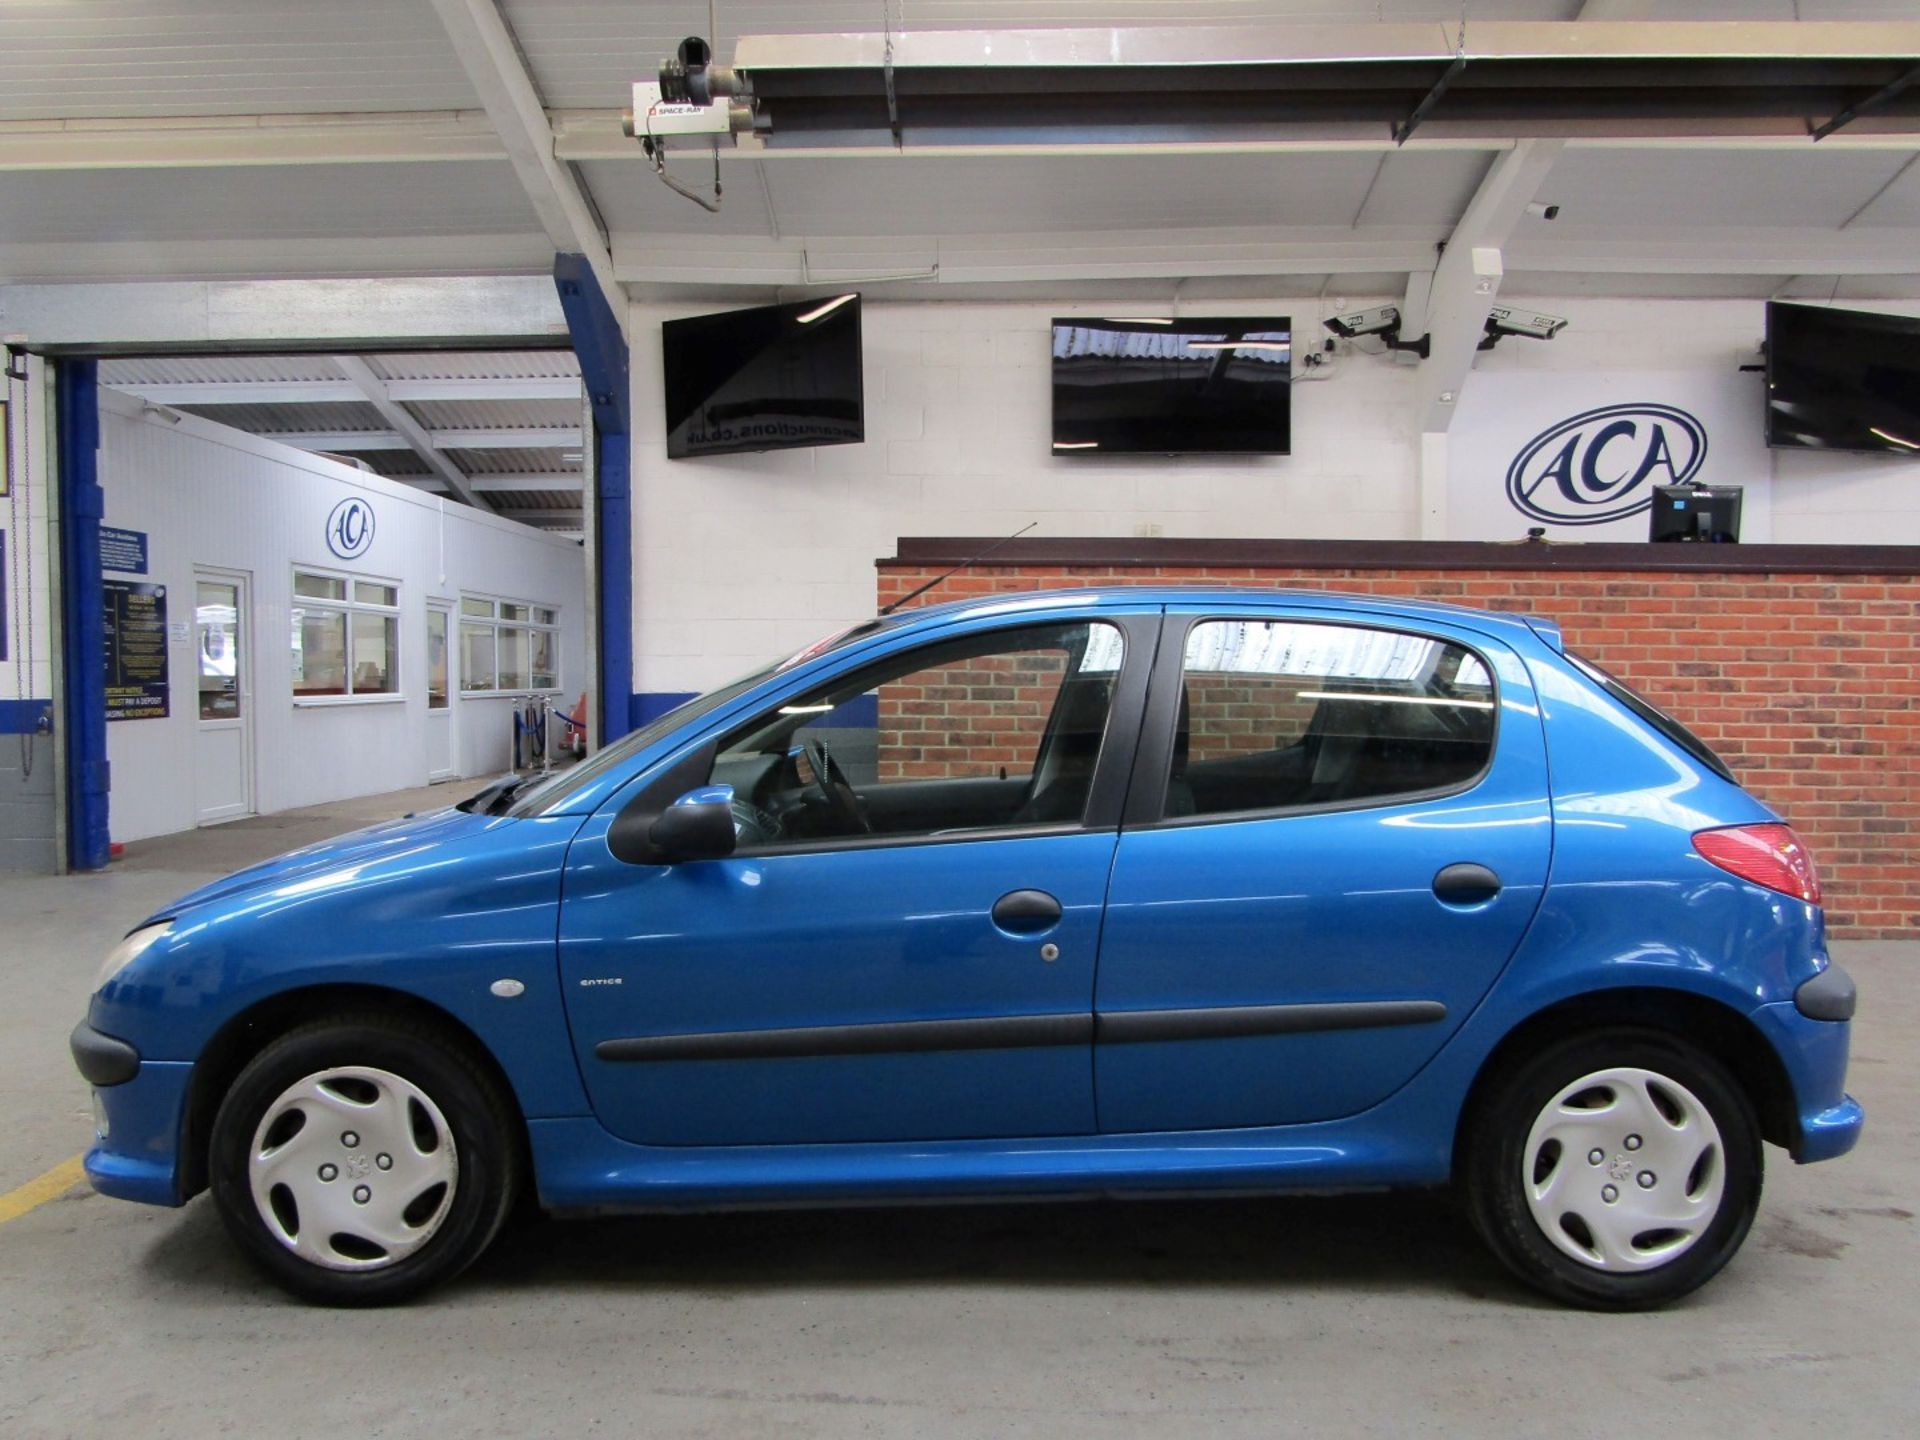 53 03 Peugeot 206 Entice - Image 21 of 21